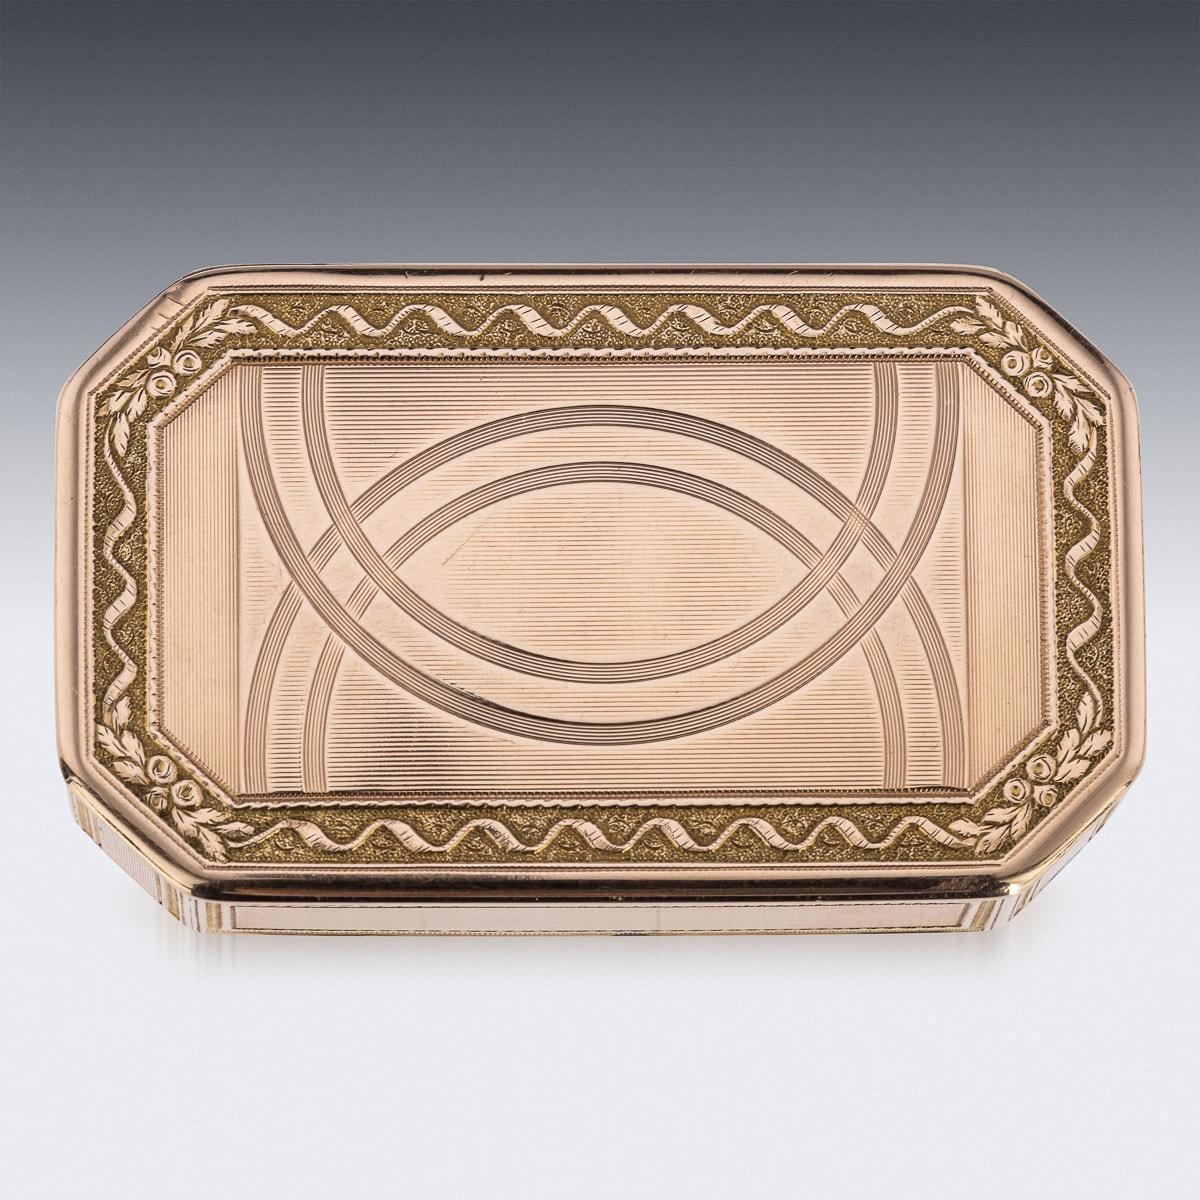 Antique early-19th century German 18k (750 standard) gold snuff box, of rectangular form with cut corners, engine turned decoration engraved with circular motifs, surrounded by floral border and engine turned decoration. Hallmarked and gold tested